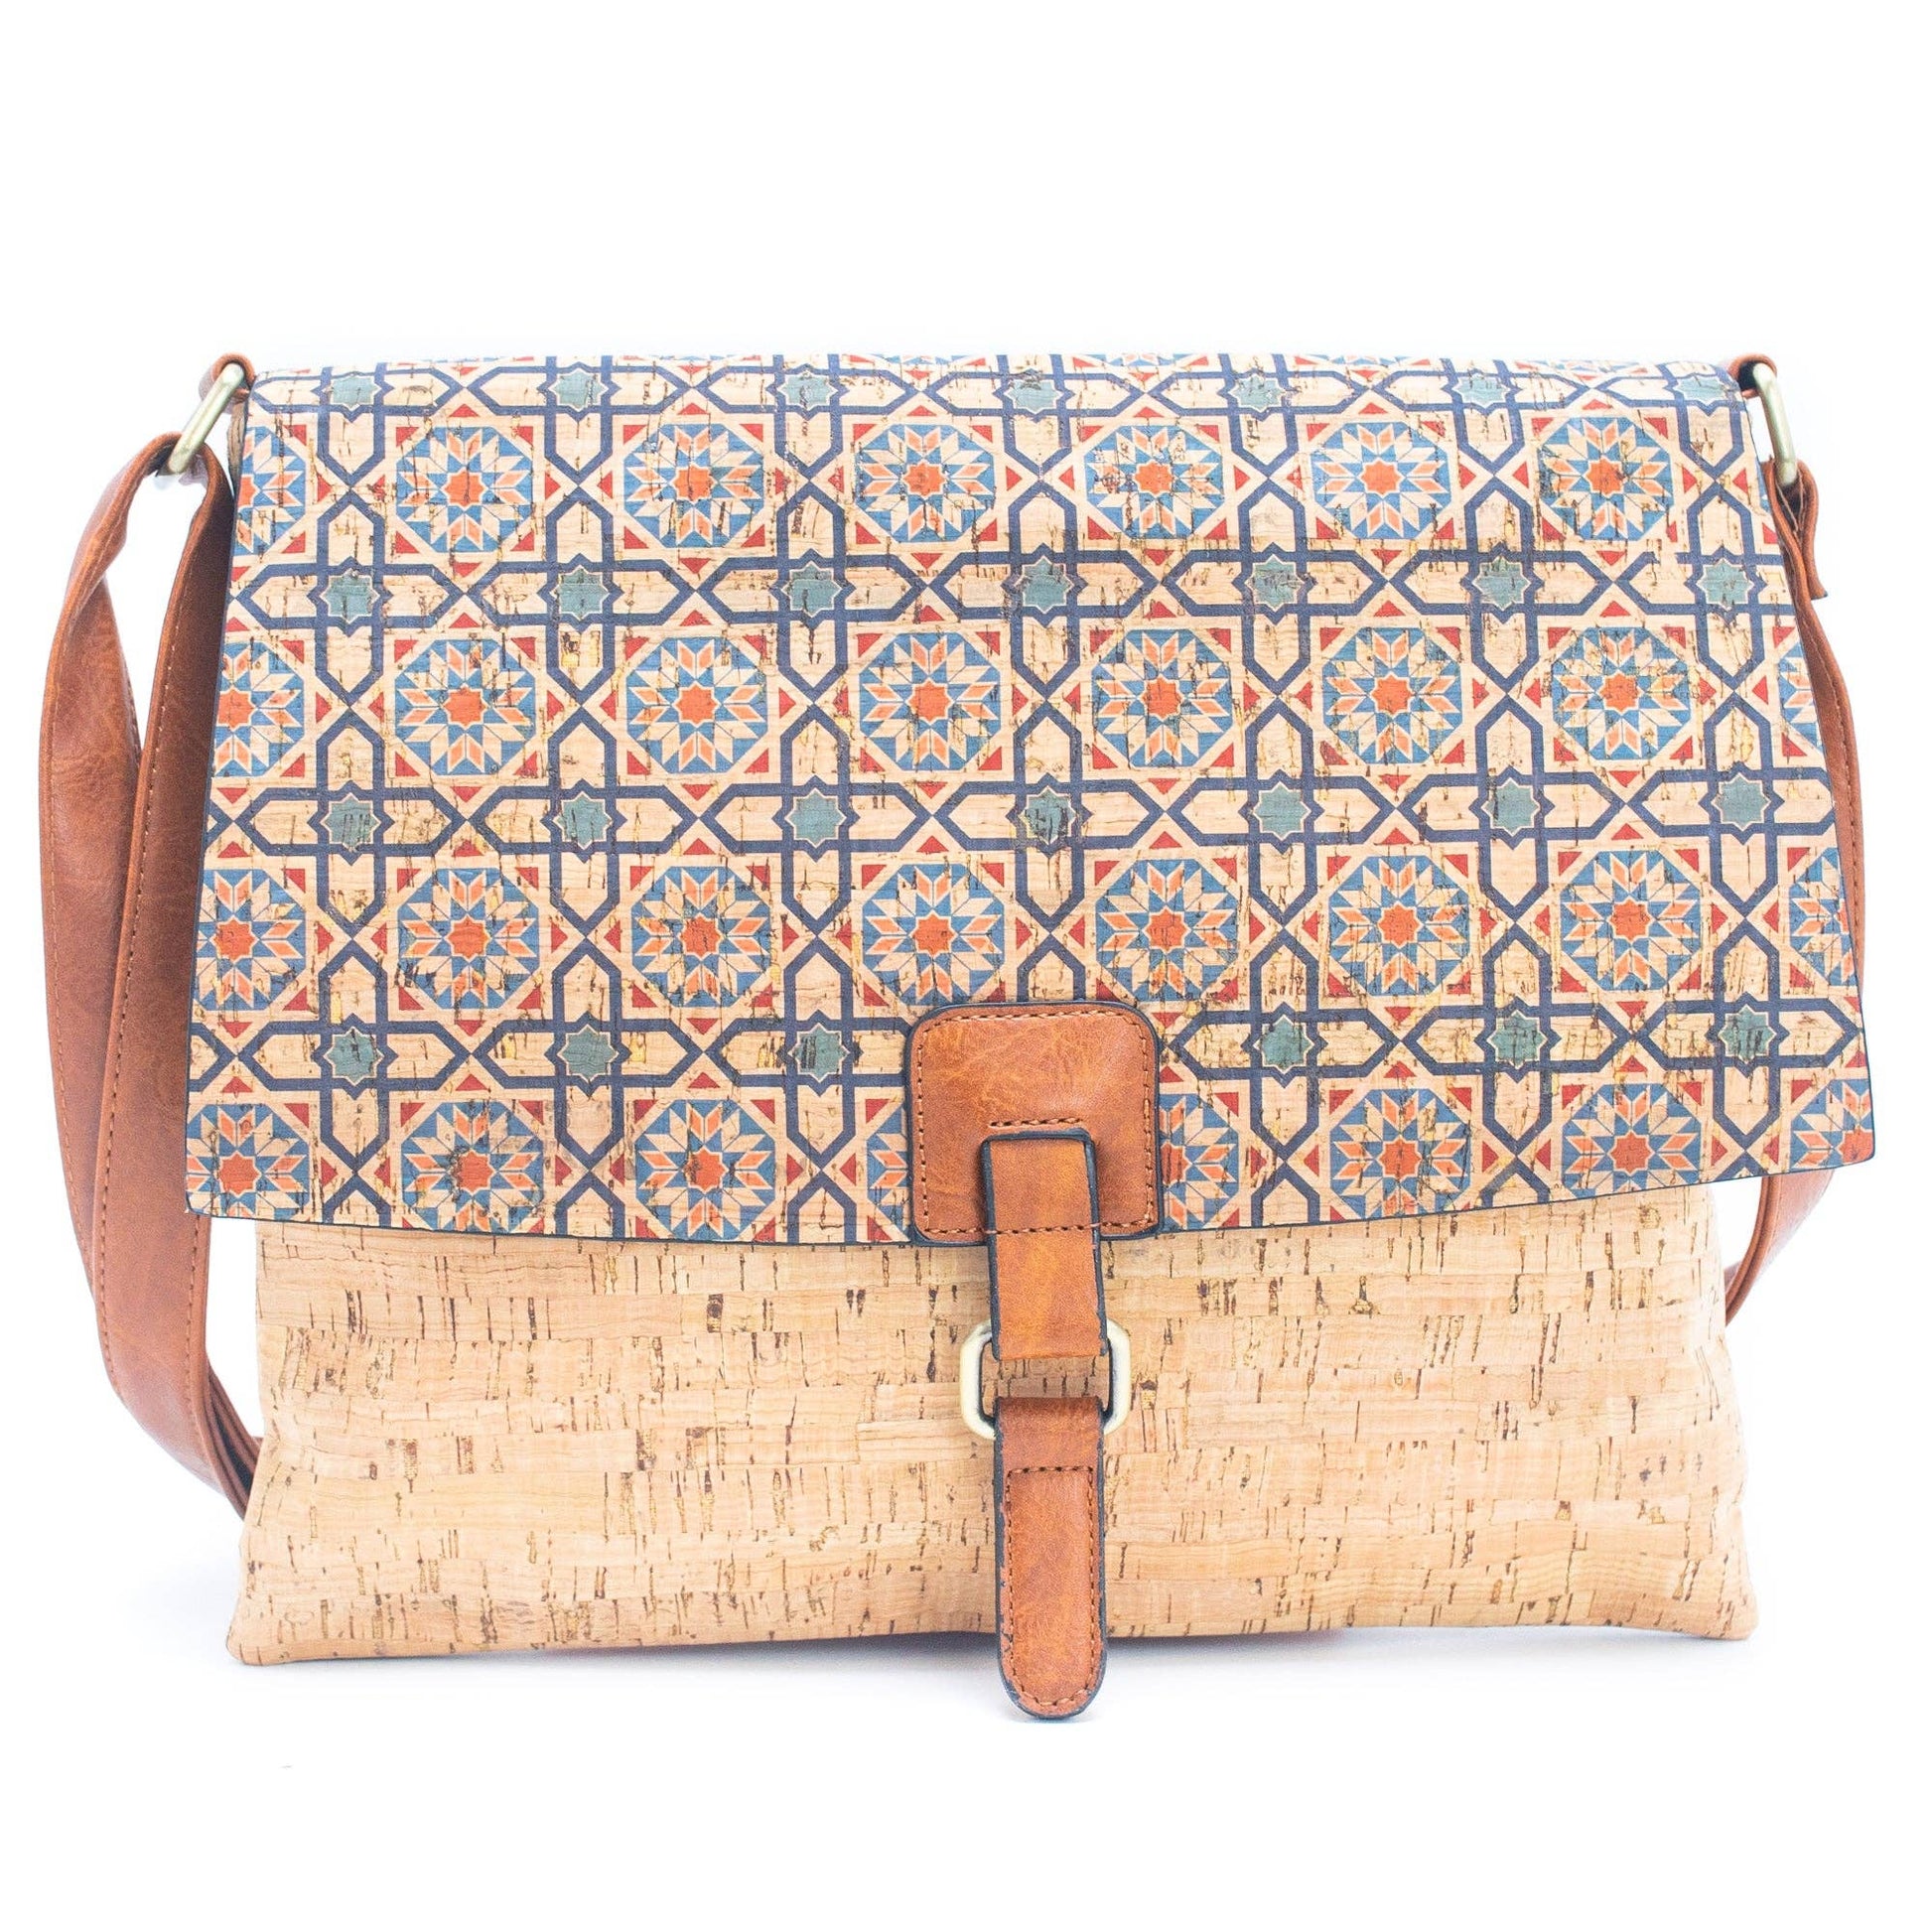 Cork Crossbody Bag with Mosaic and Floral Prints BAGD-464-10